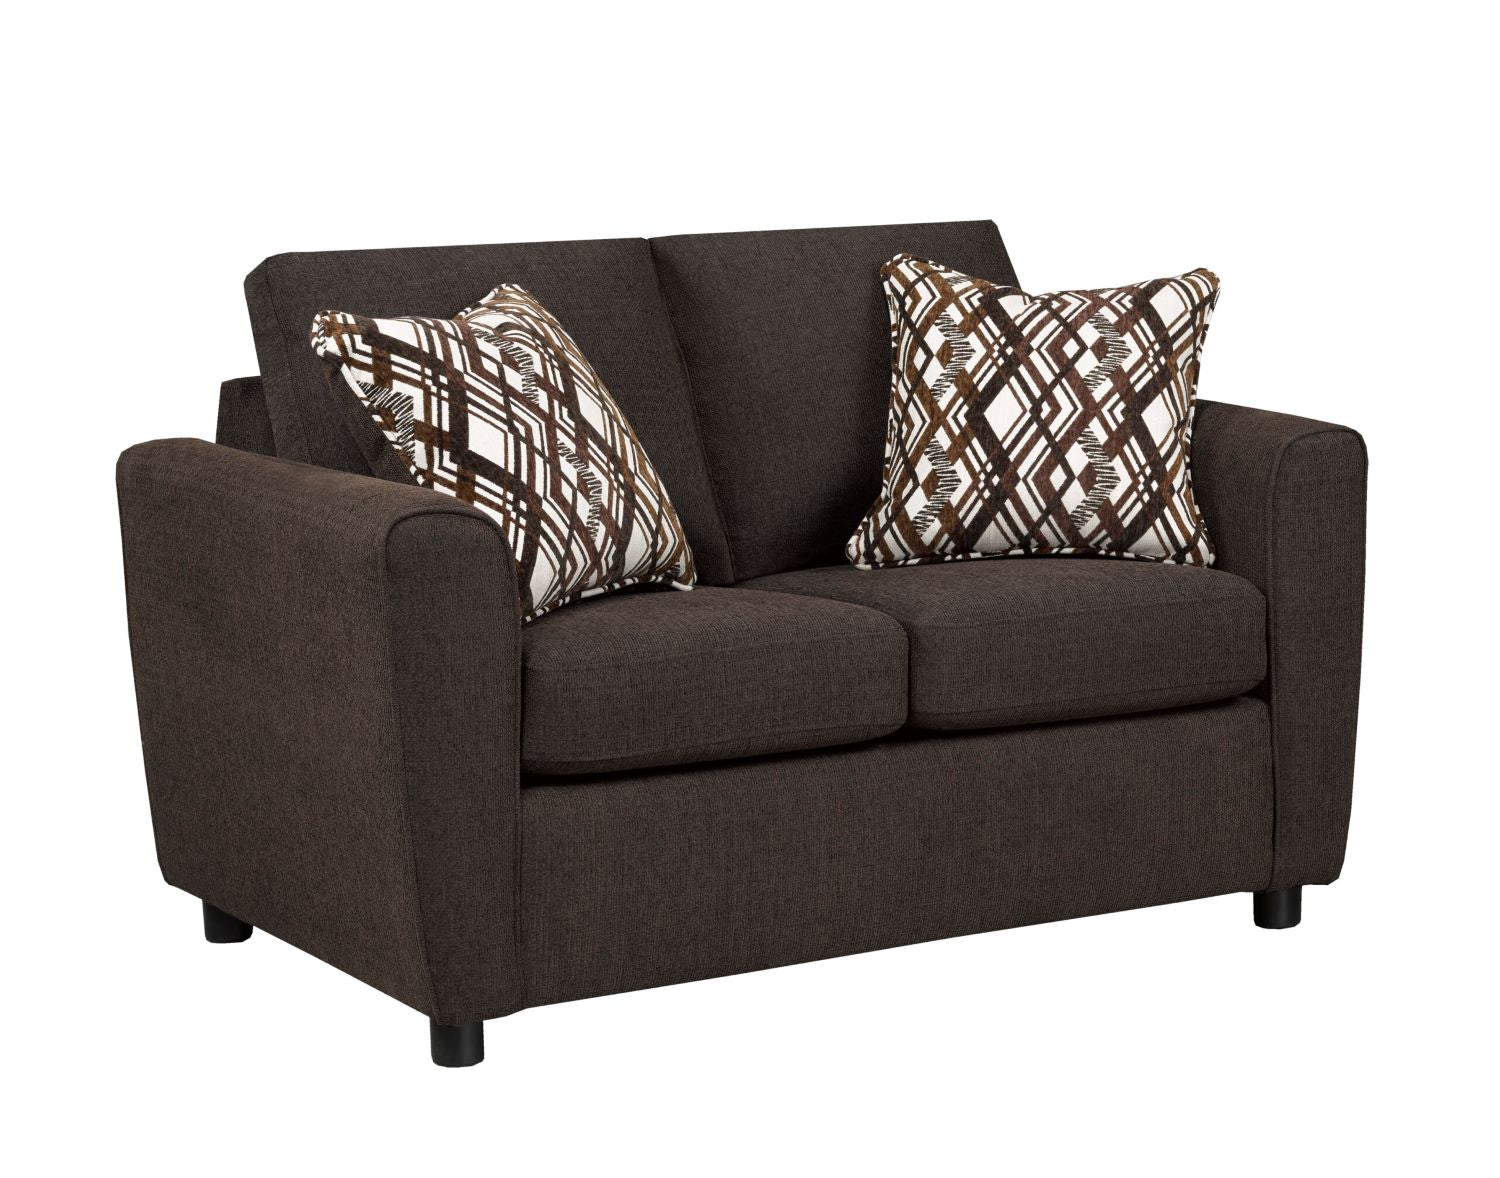 Canadian Made Huttwill Chocolate Sofa Collection 1636